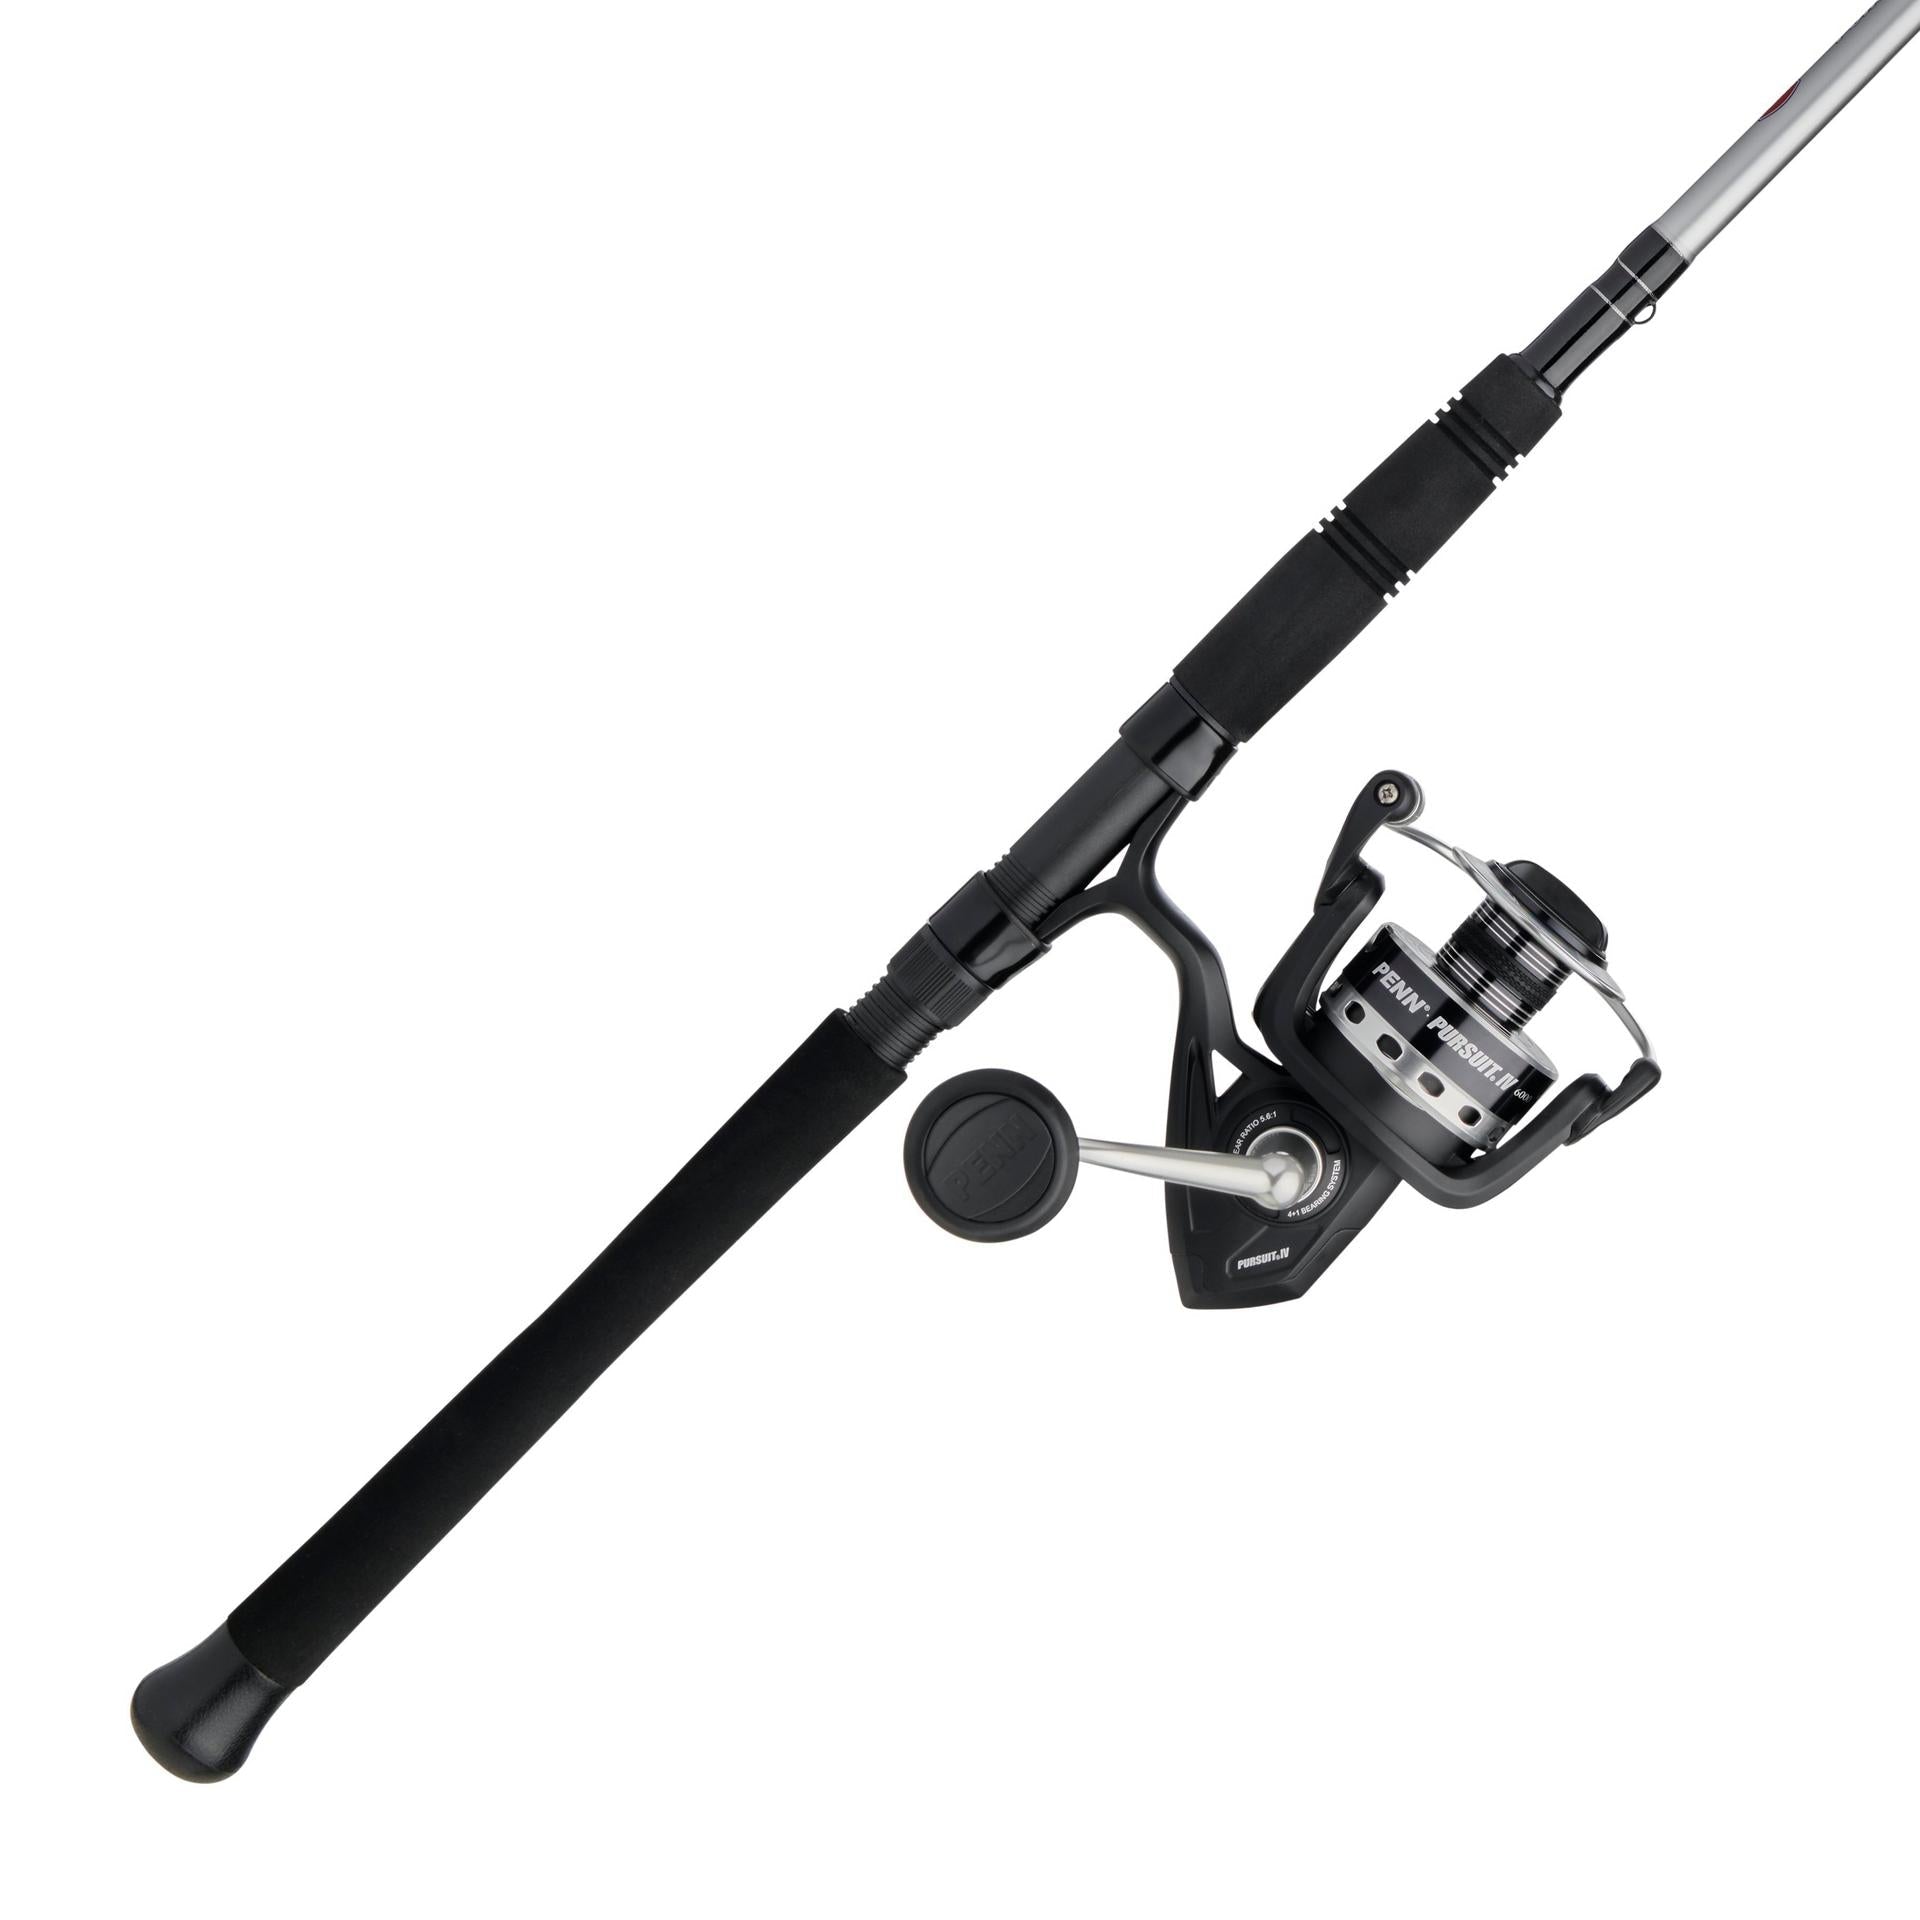 on the other hand, deliver Cannon top 10 fishing rod and reel